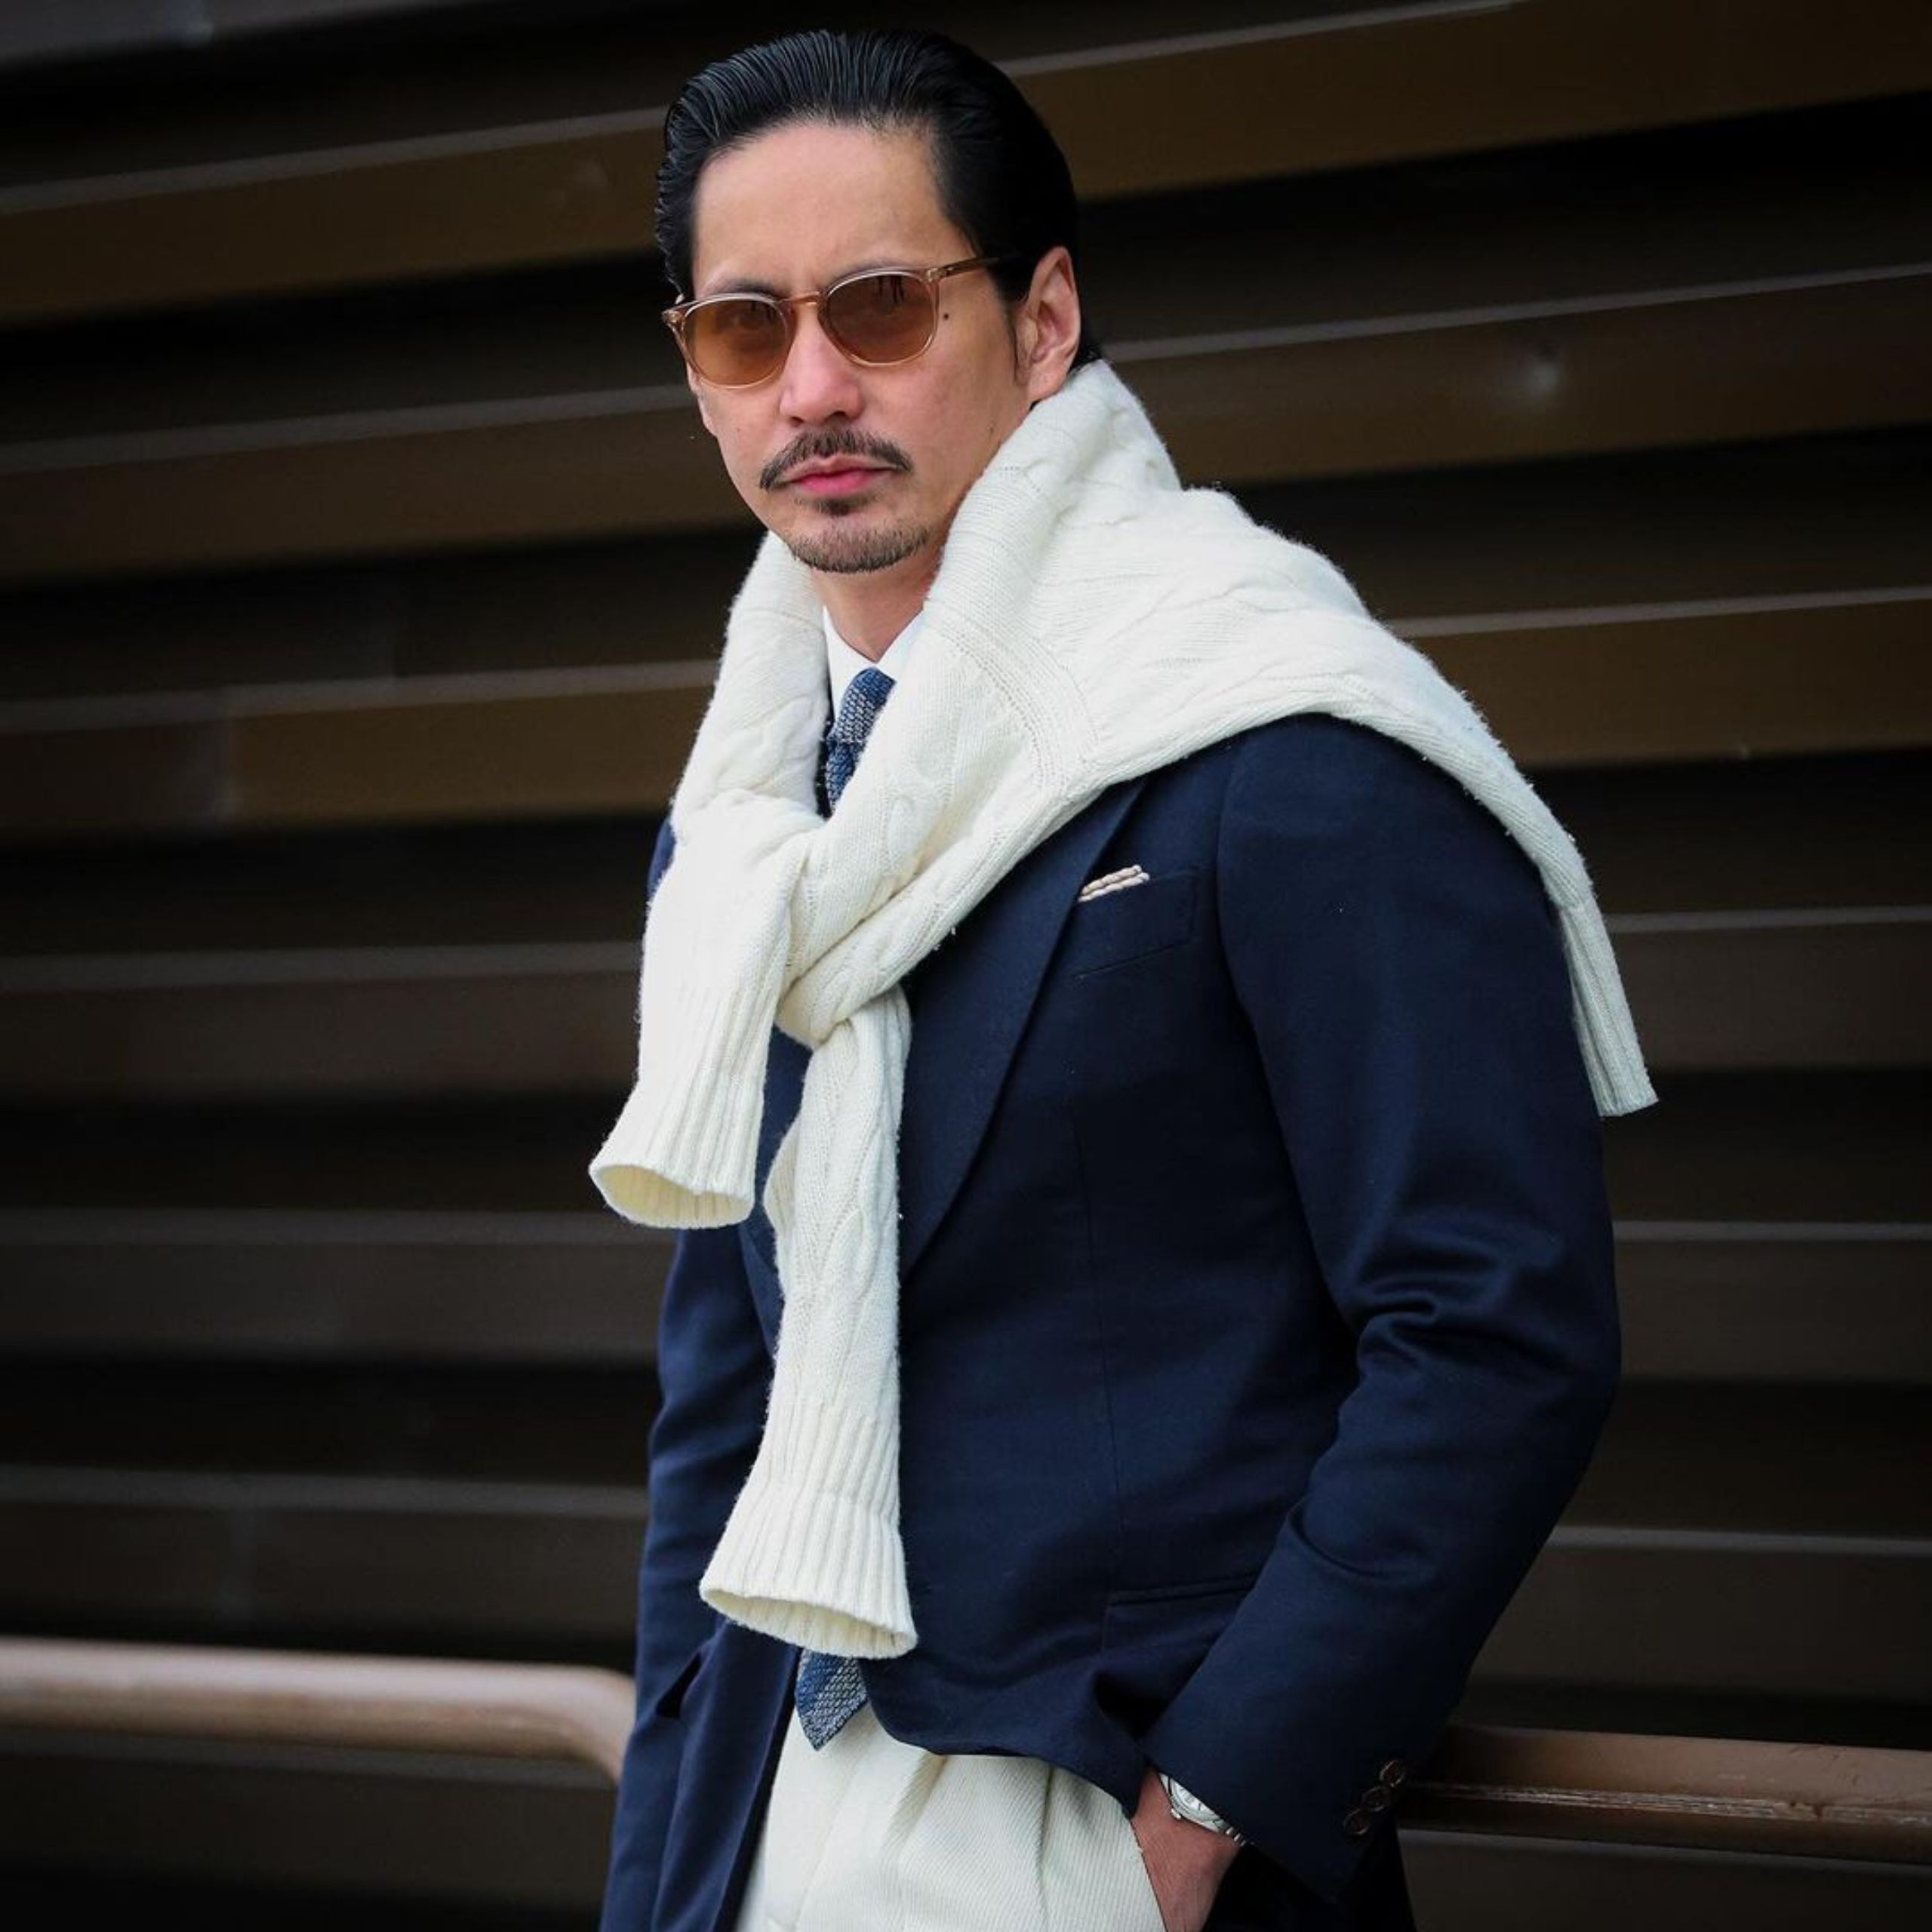 Exclusive: AJ Dee Shares His Fashion Takeover at Pitti Uomo 105 in Italy